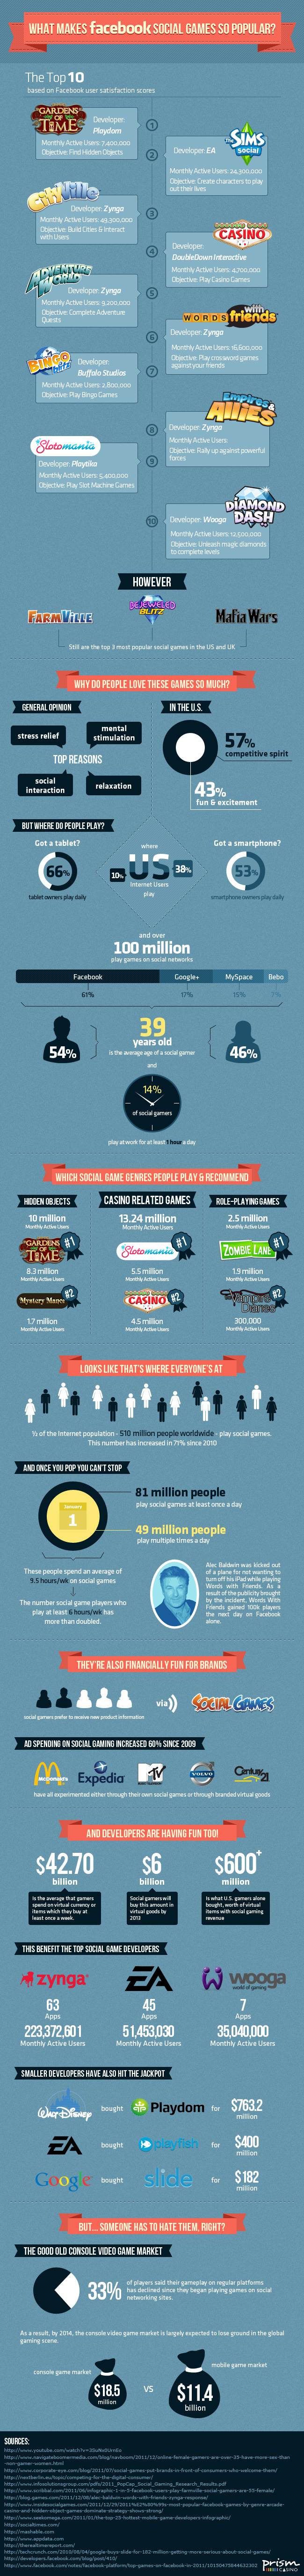 Social-gaming-infographic-1-19-2012